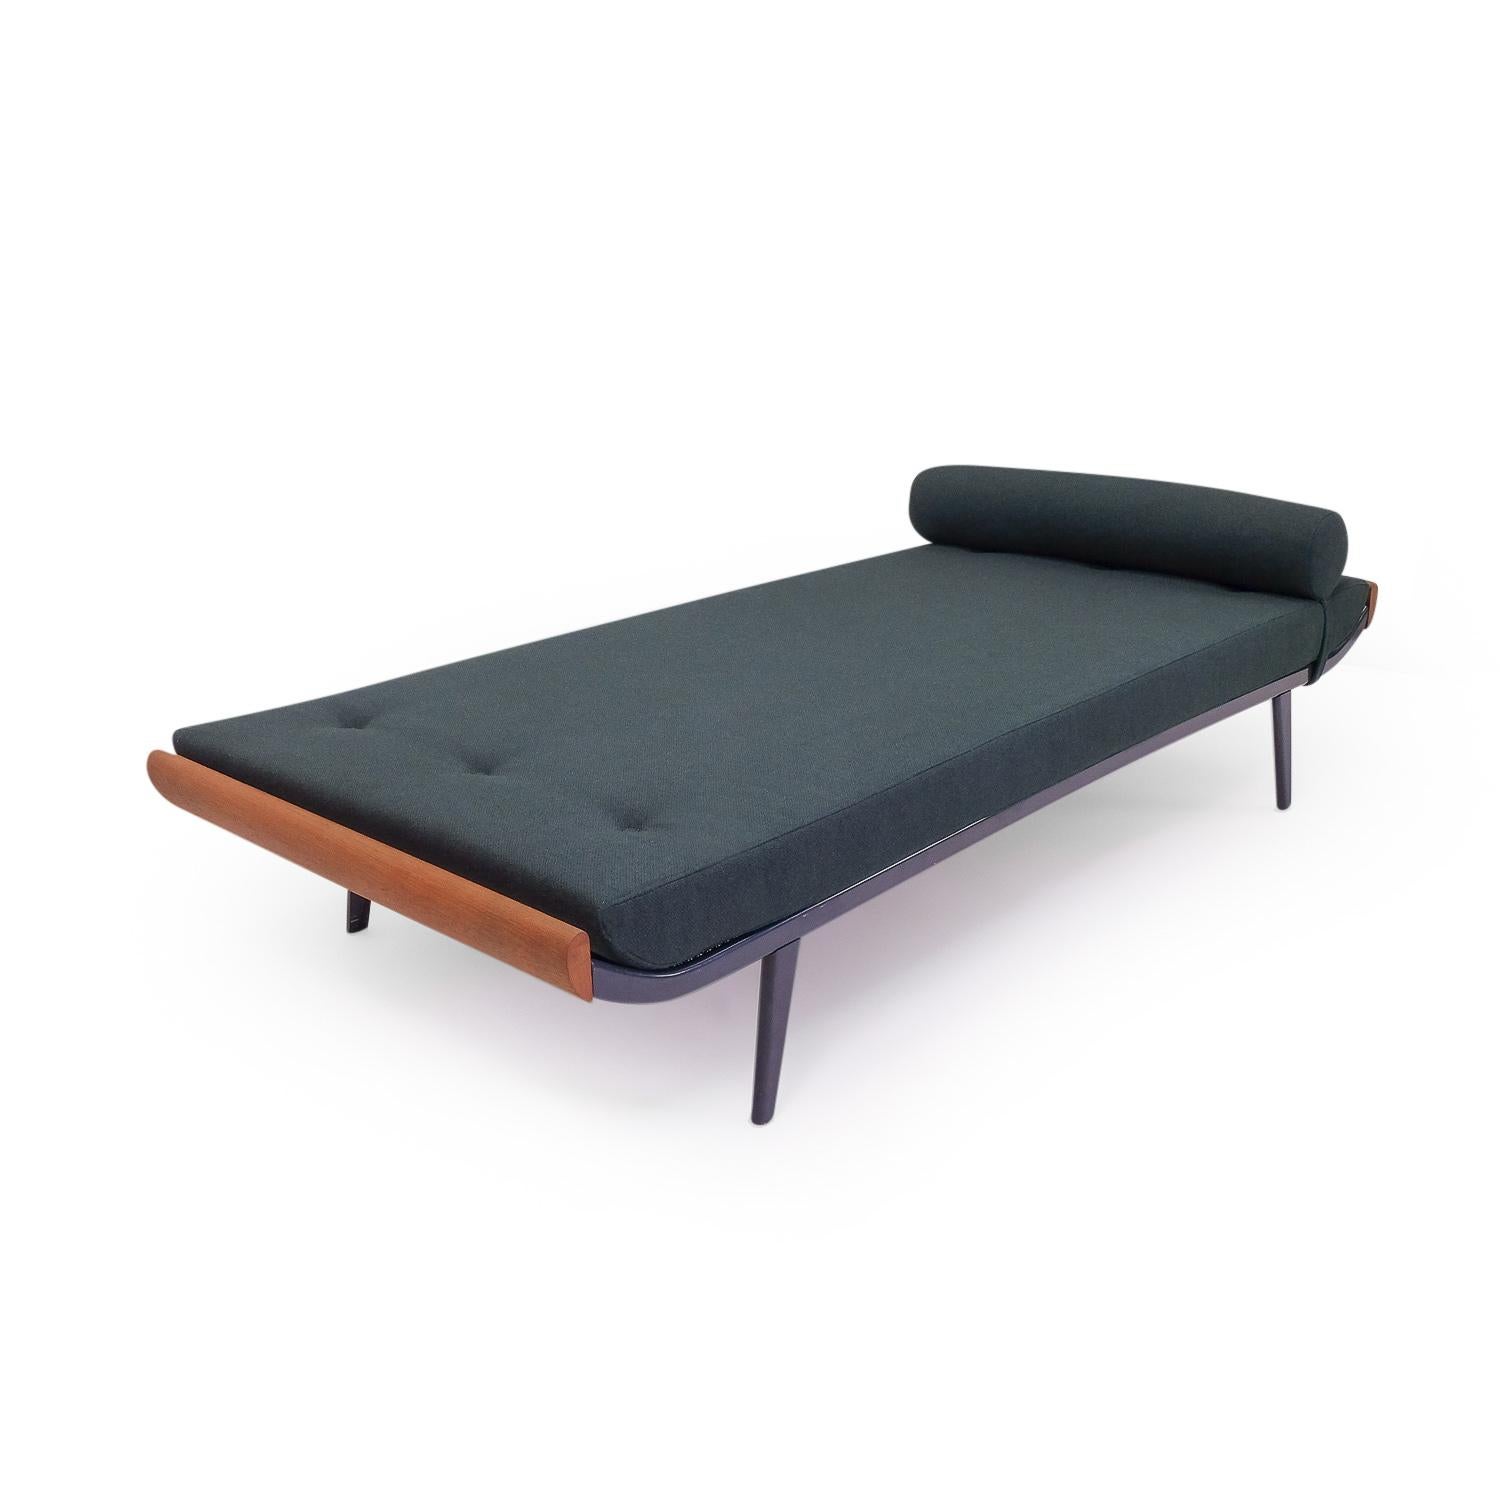 Vintage modernist daybed designed by Dick Cordemijer for Auping (the Netherlands) during the 1950s.

New high-quality green upholstery and foam; the daybed can be used as both a sofa and spare bed. The cover features a zipper on both pillow and